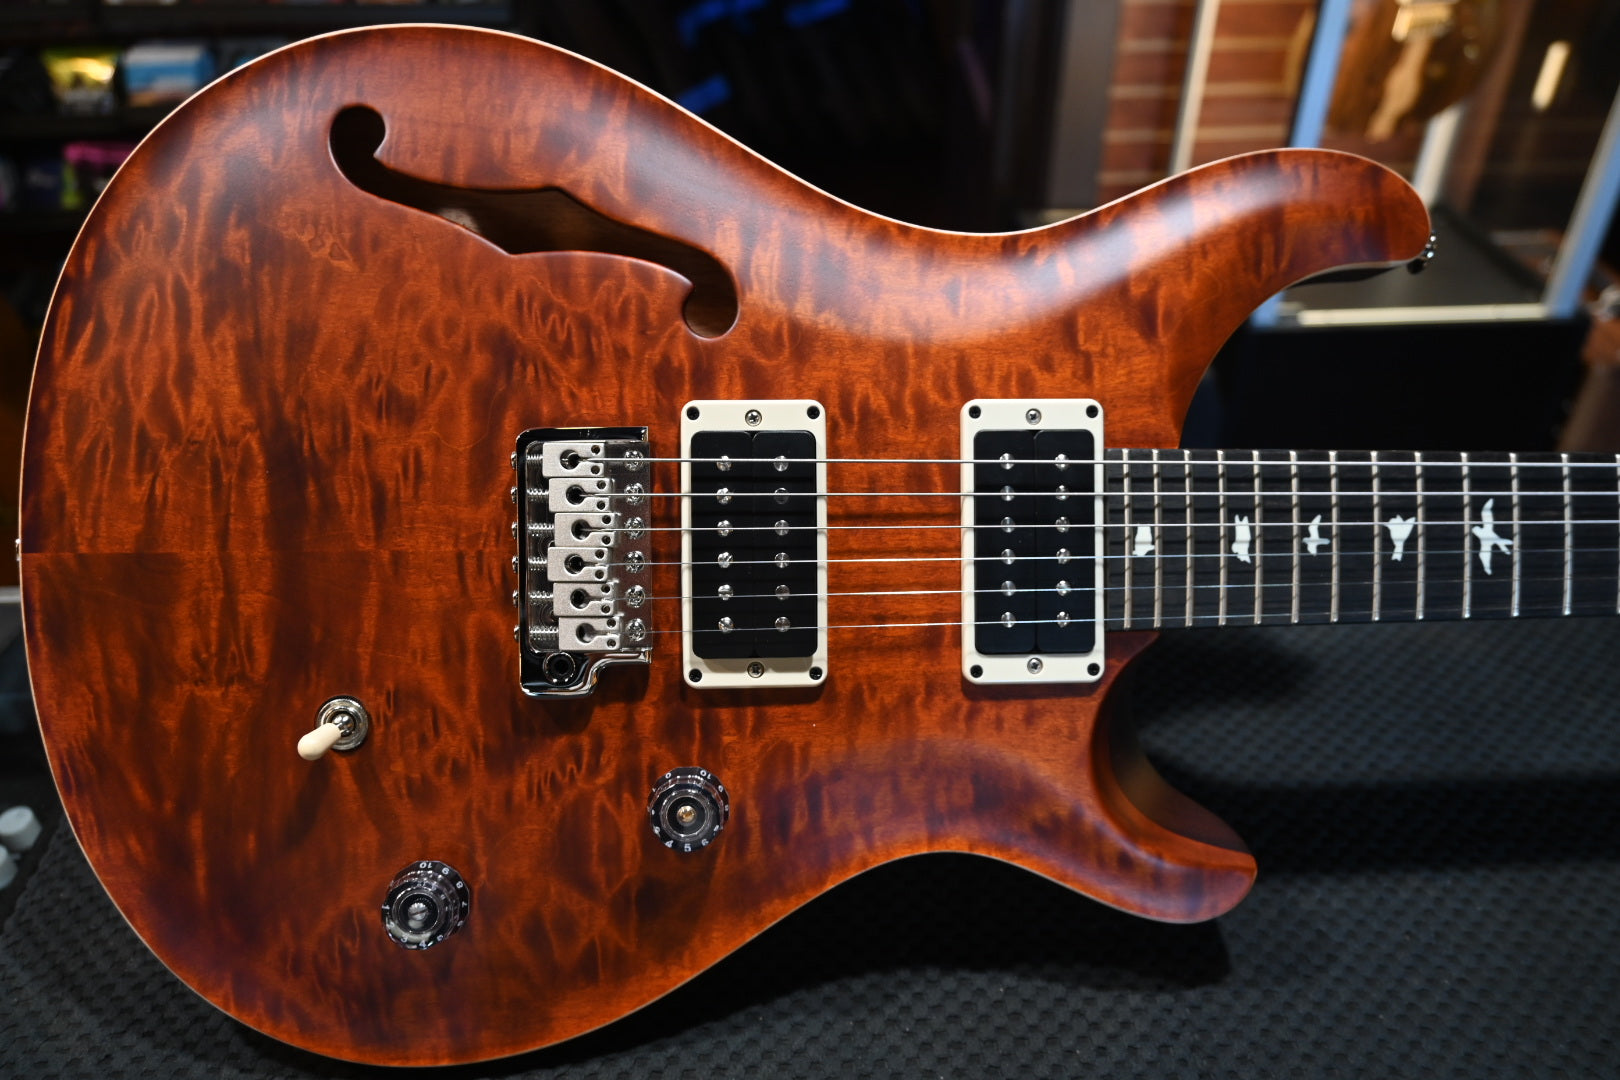 PRS Wood Library CE 24 Semi-Hollow Quilt - Tortoise Shell Satin Guitar #8682 - Danville Music